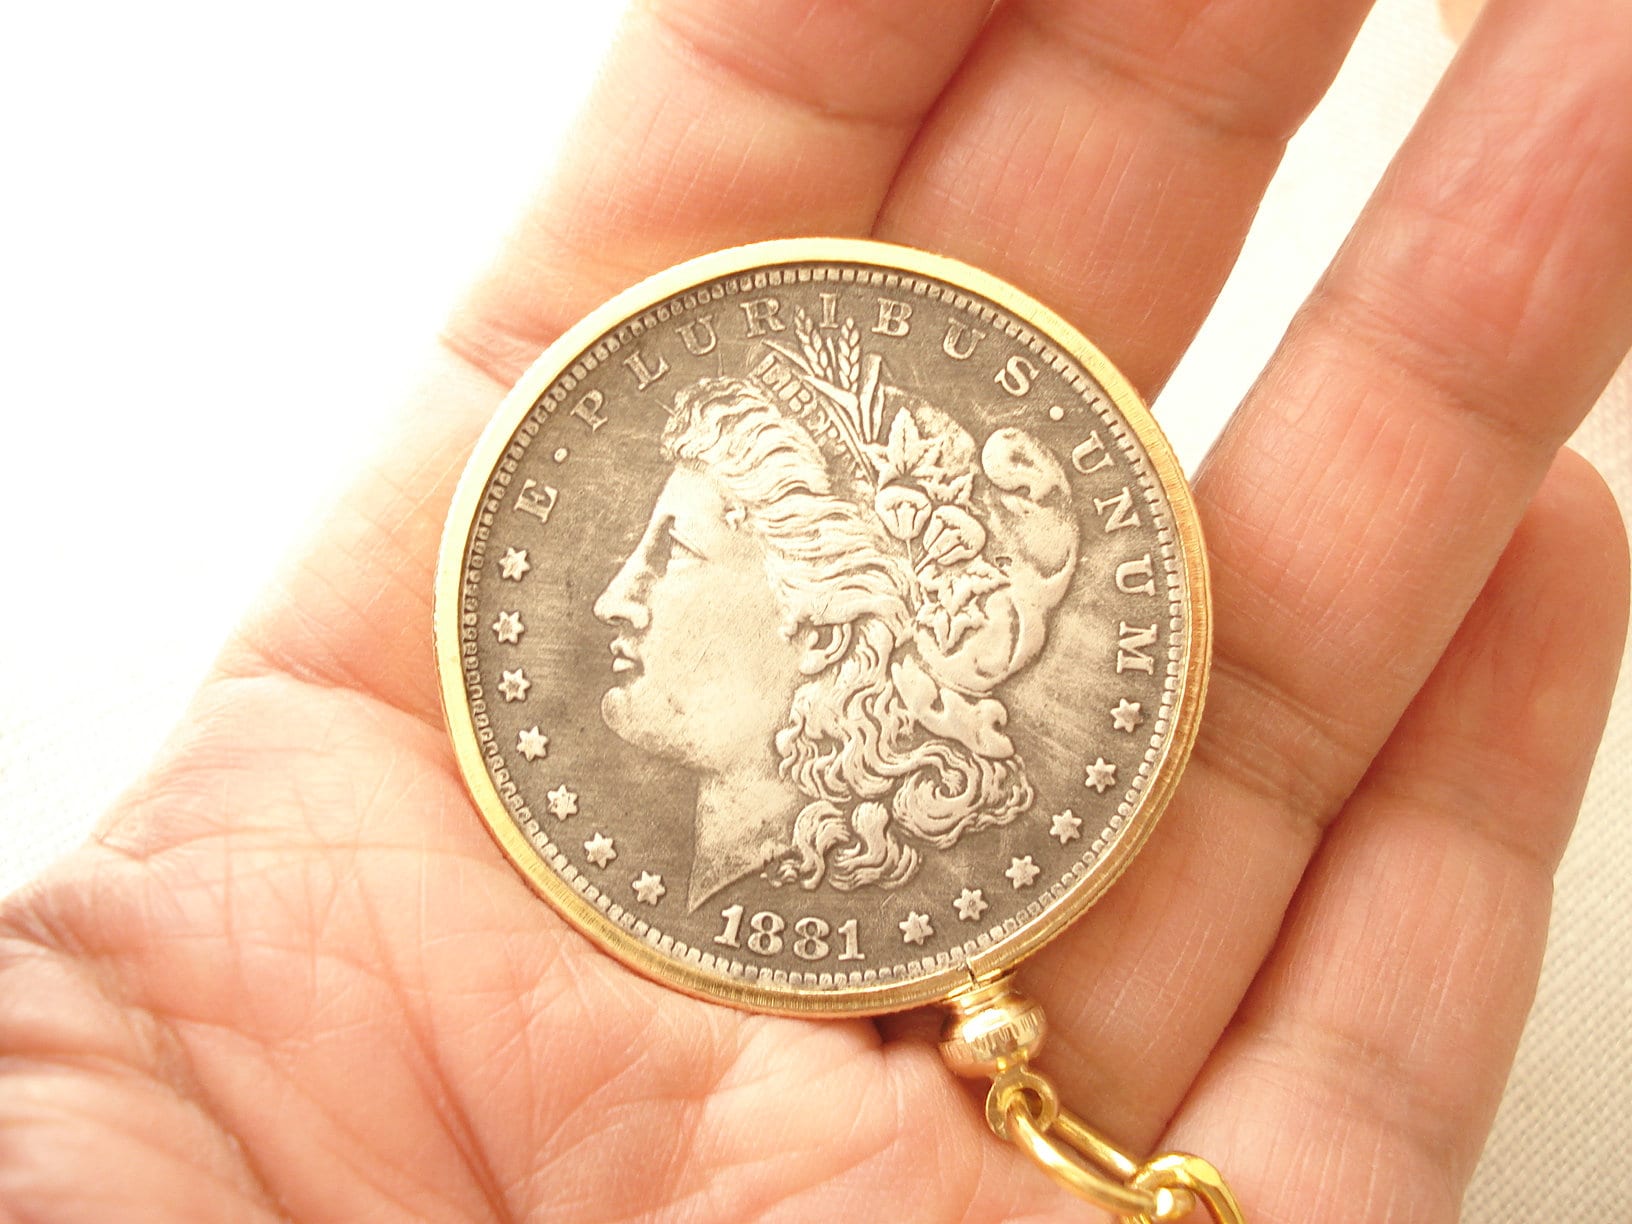 1881 Coin - Etsy